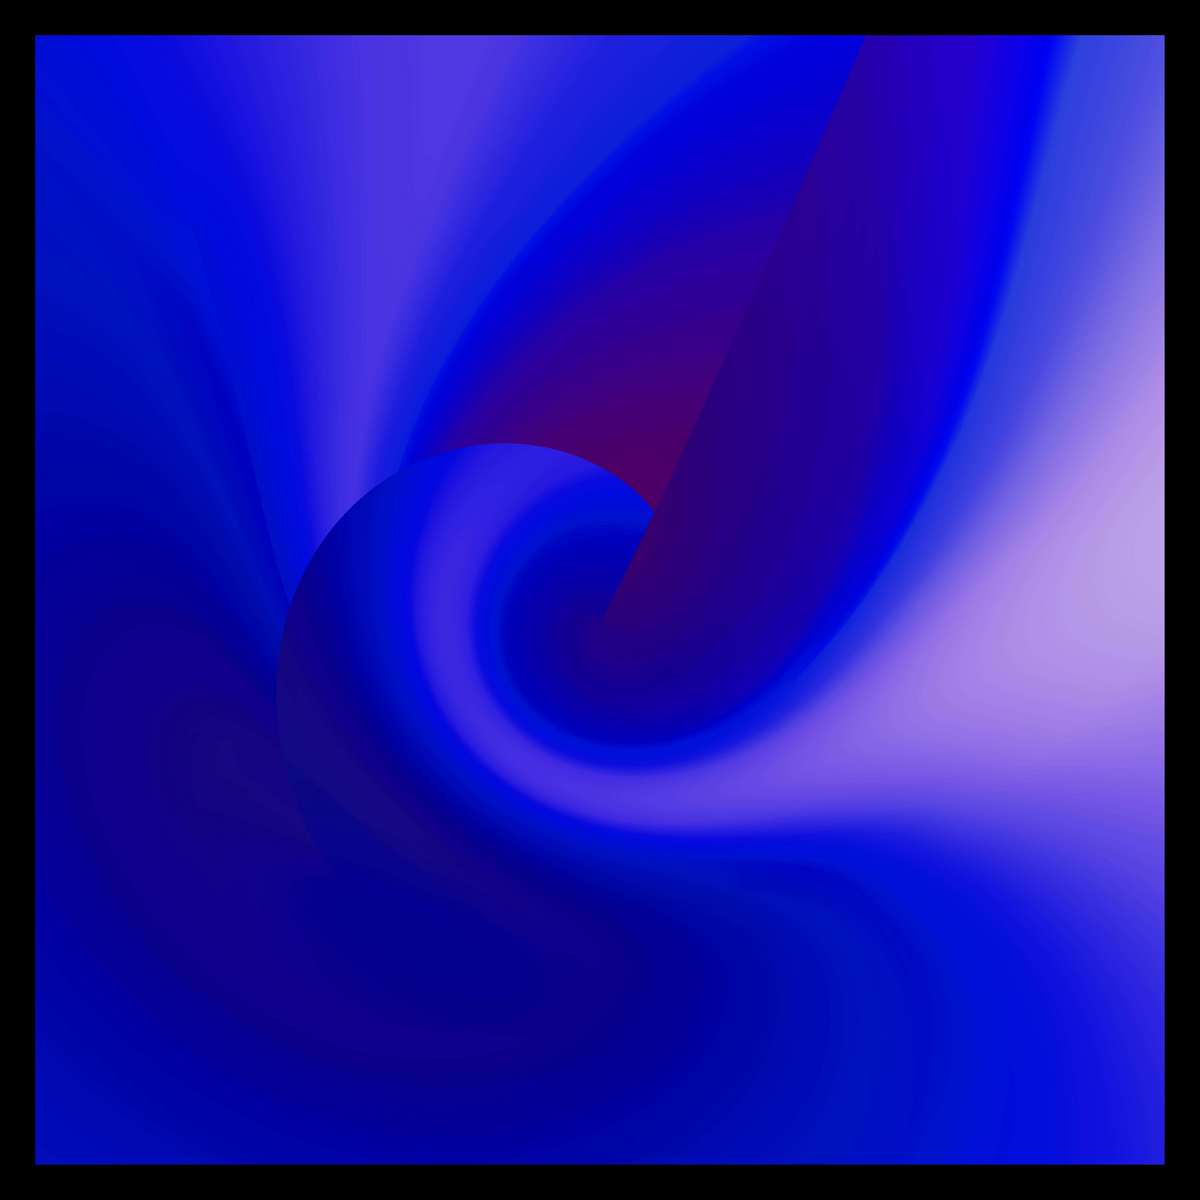 Rhapsody in Blue : Section 0 : American artist digital invention archival artifact color print image emerging capture creative convergent transparency universe dream history painter Hybrid exhibition